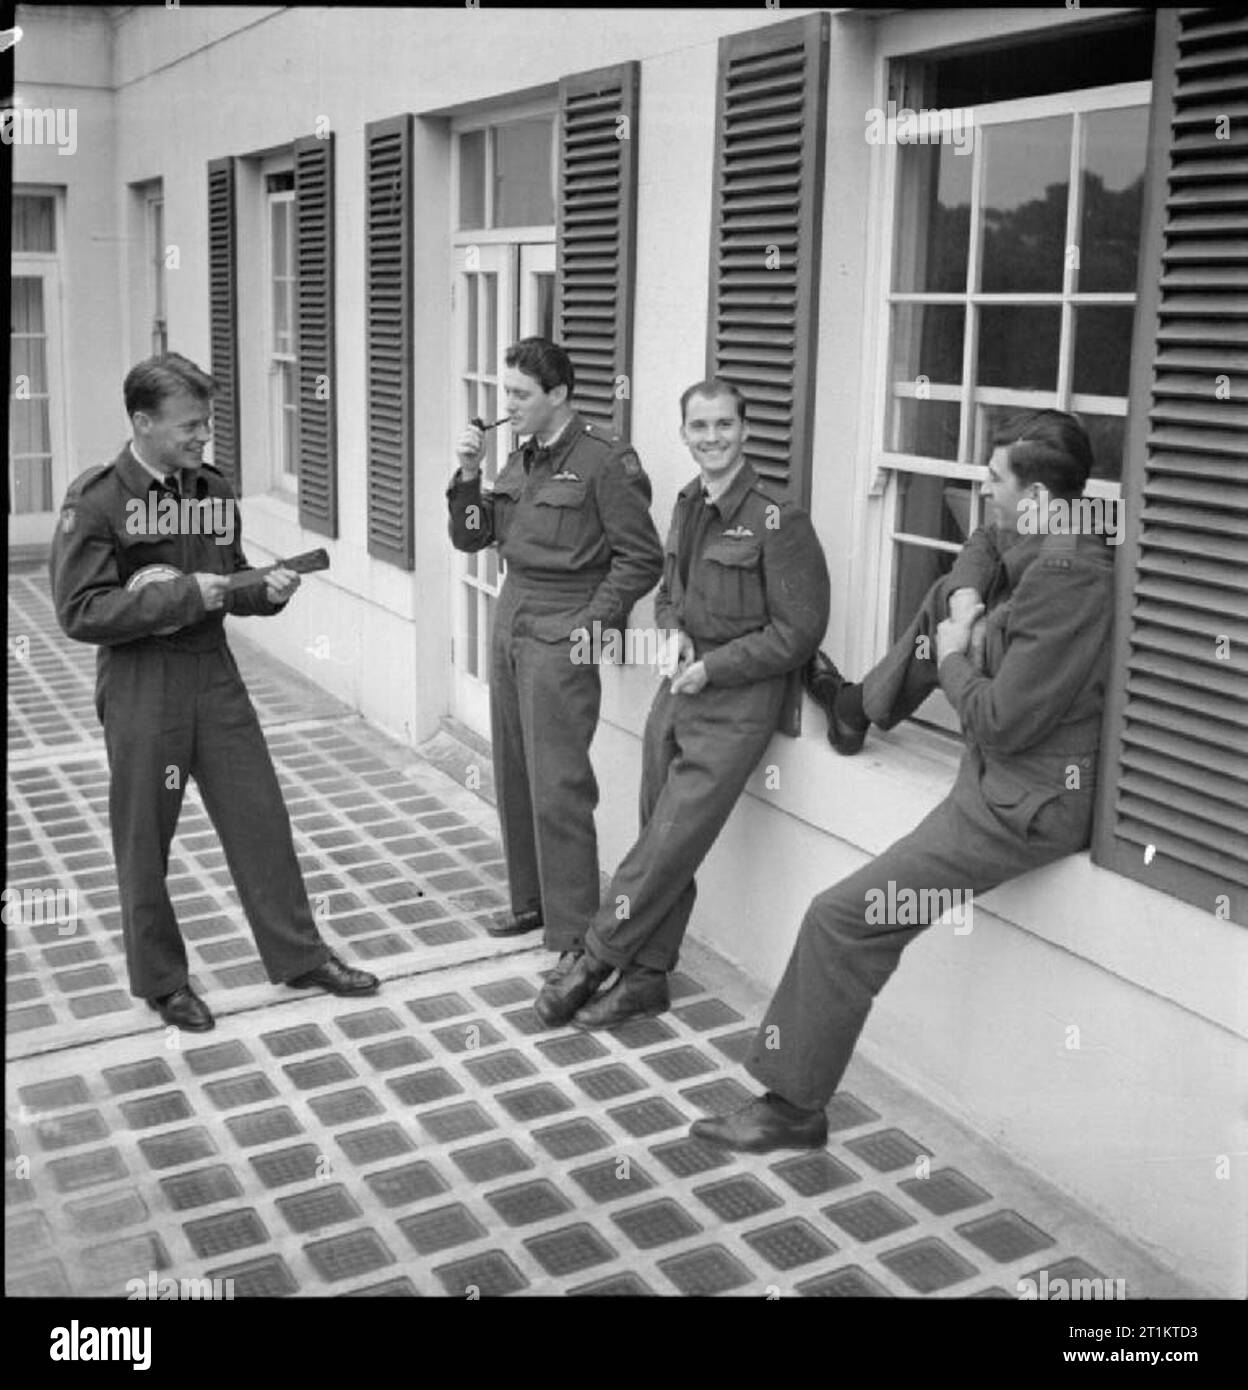 Americans in Britain- the work of No 121 (eagle) Squadron RAF, Rochford, Essex, August 1942 Flying Officer Osbourne plays a tune on his banjulele as entertainment for his Eagle Squadron colleagues on the terrace of the old English house in which they are billeted. Left to right, the 'audience' is: Pilot Officer Kearney (smoking a pipe), Pilot Officer Slater and Pilot Officer Padget (seated on the window sill). Stock Photo